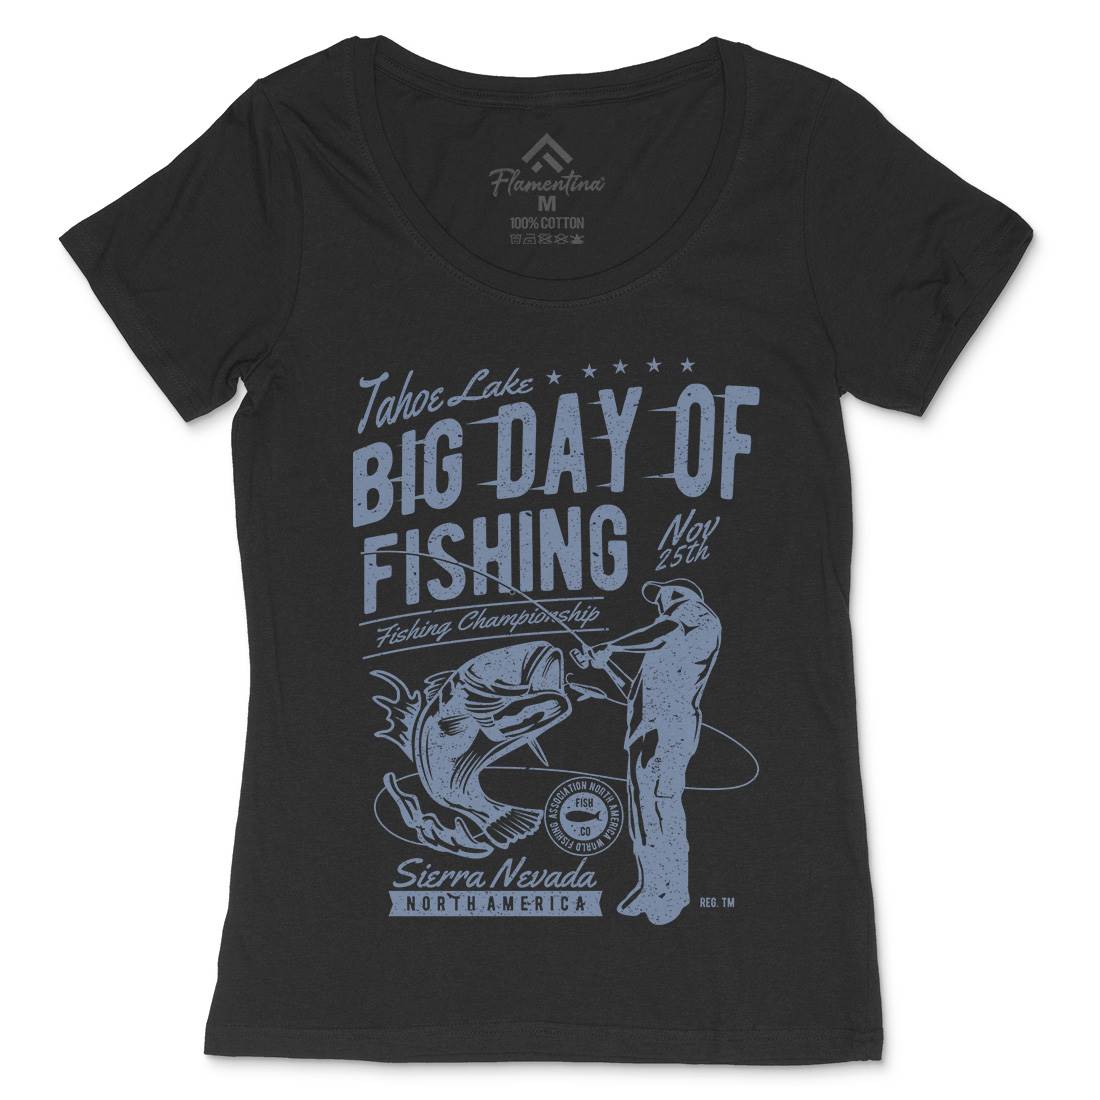 Big Day Of Womens Scoop Neck T-Shirt Fishing A618